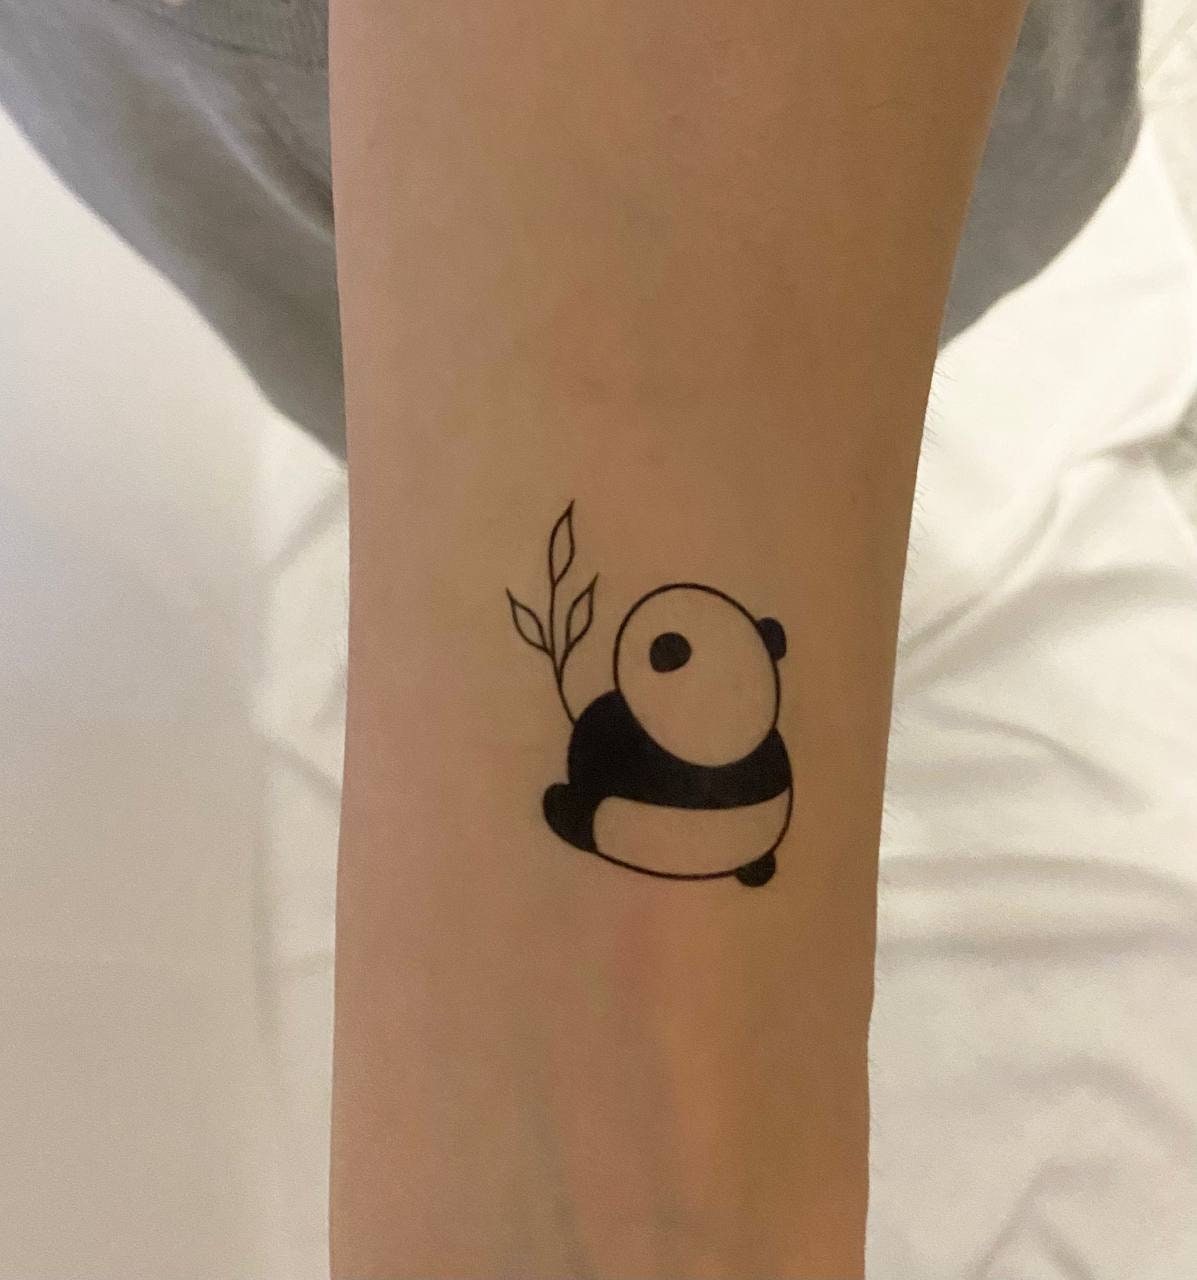 Mehz Tattoo Studio  The Panda also known as Panda Bear is a chubby  looking black and white coated herbivorous animal  Their adorable looks  and funloving nature are the main reasons